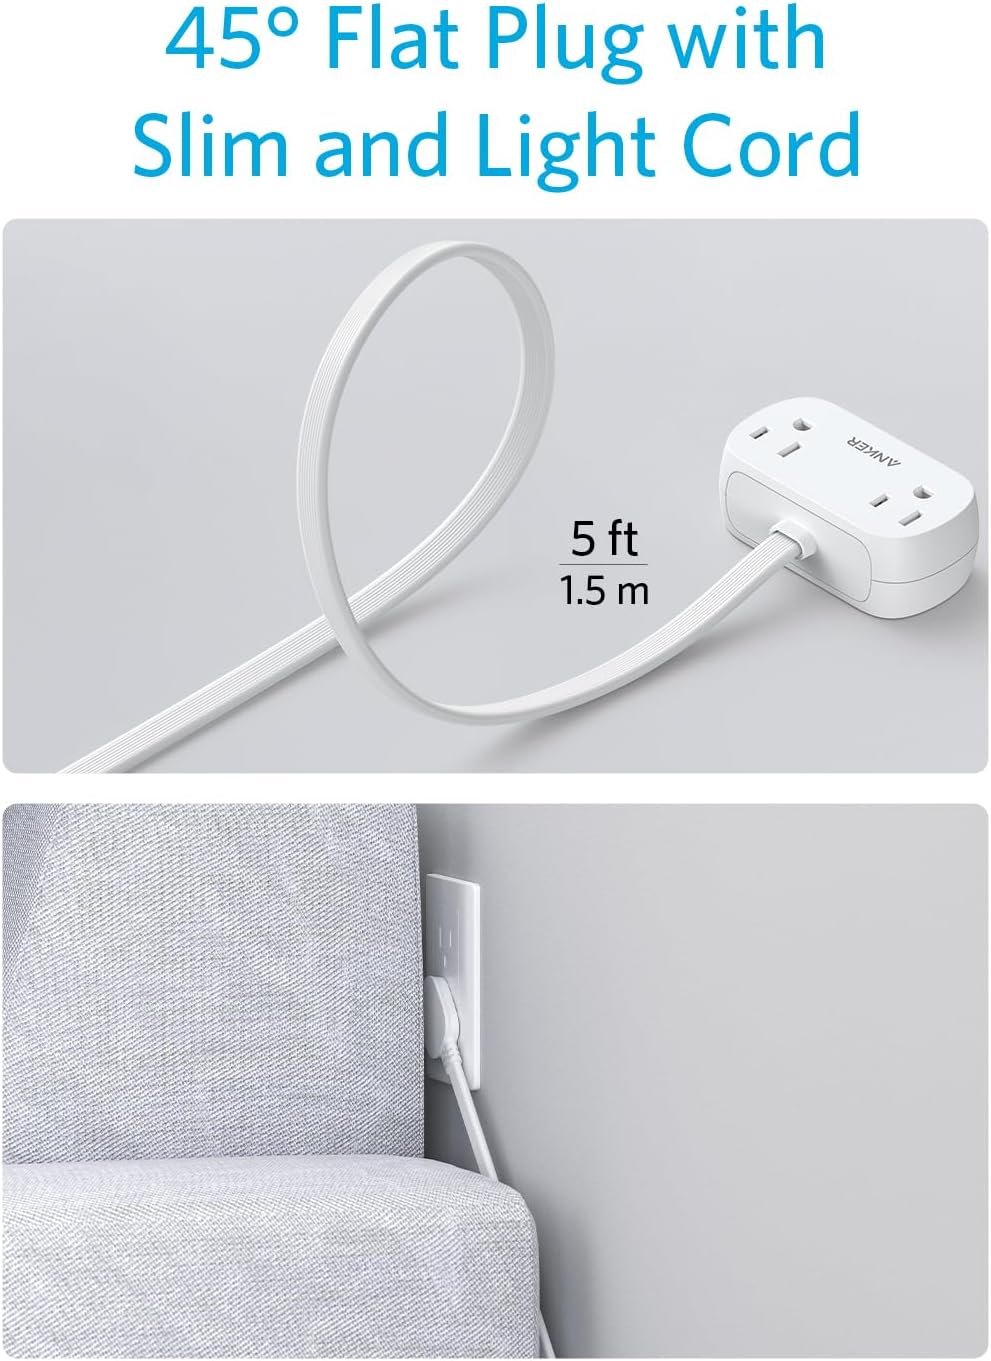 Anker USB Power Strip, Small Power Strip with 2 Outlets and 2 USB Charger, 5 ft Thin Cord and Flat Plug